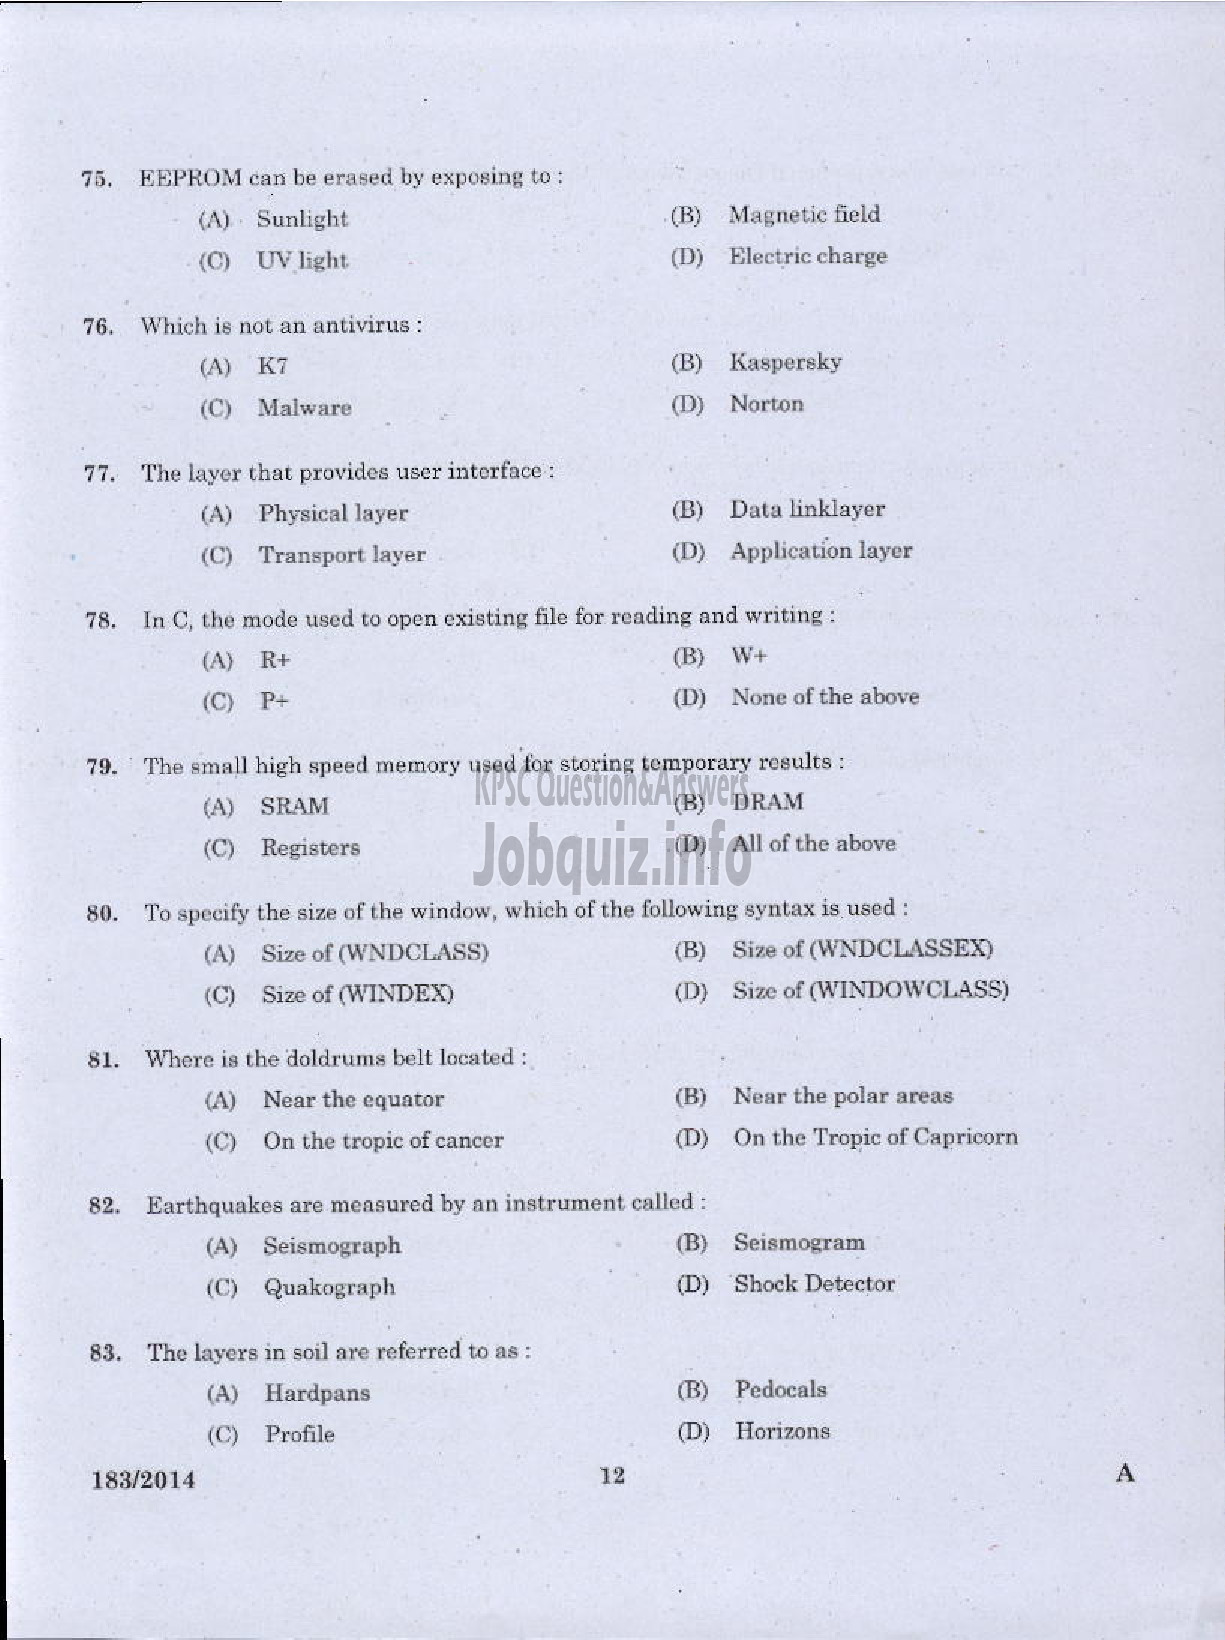 Kerala PSC Question Paper - TRADESMAN COMPUTER ENGINEERING TECHNICAL EDUCATION TVM KGD-10